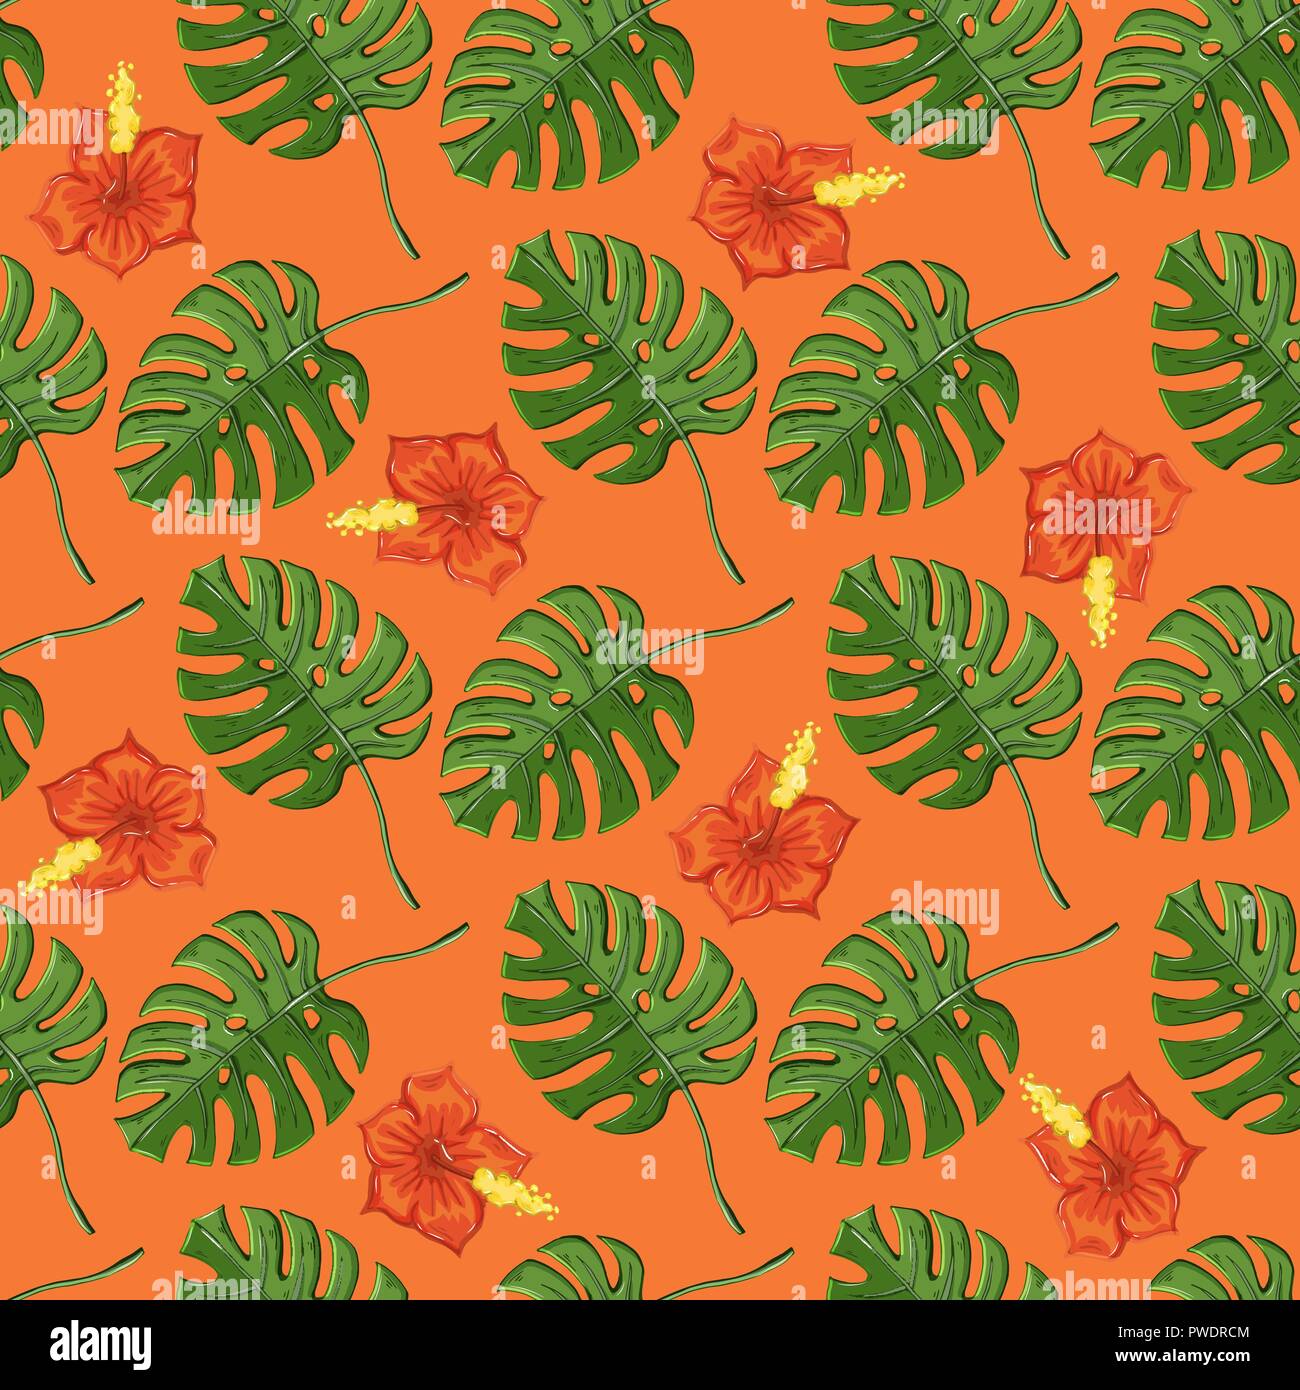 Tropical pattern with monstera plants and flovers Stock Vector